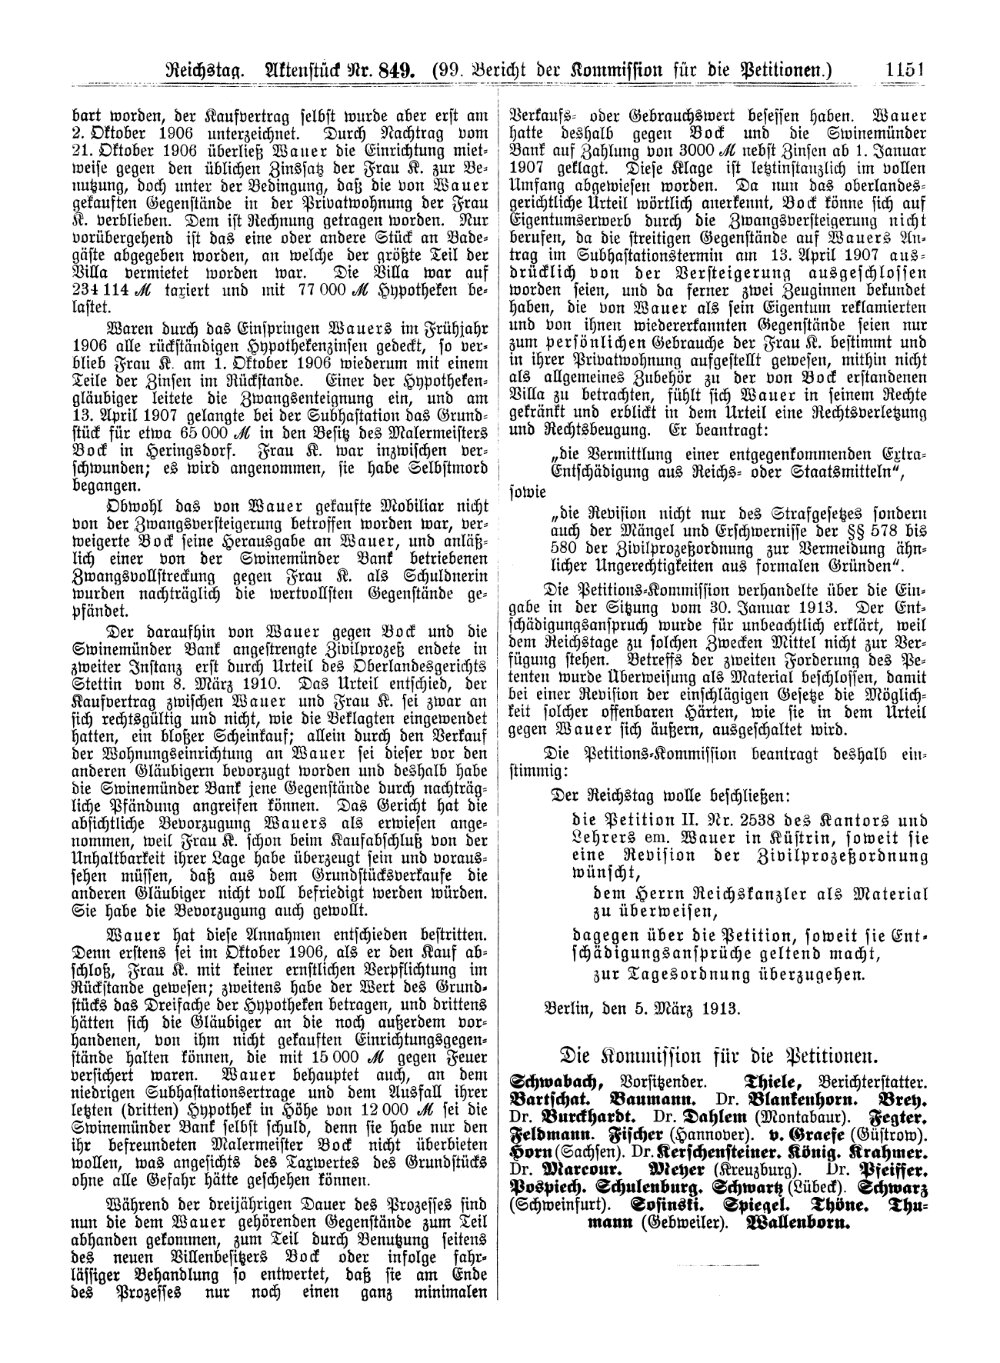 Scan of page 1151